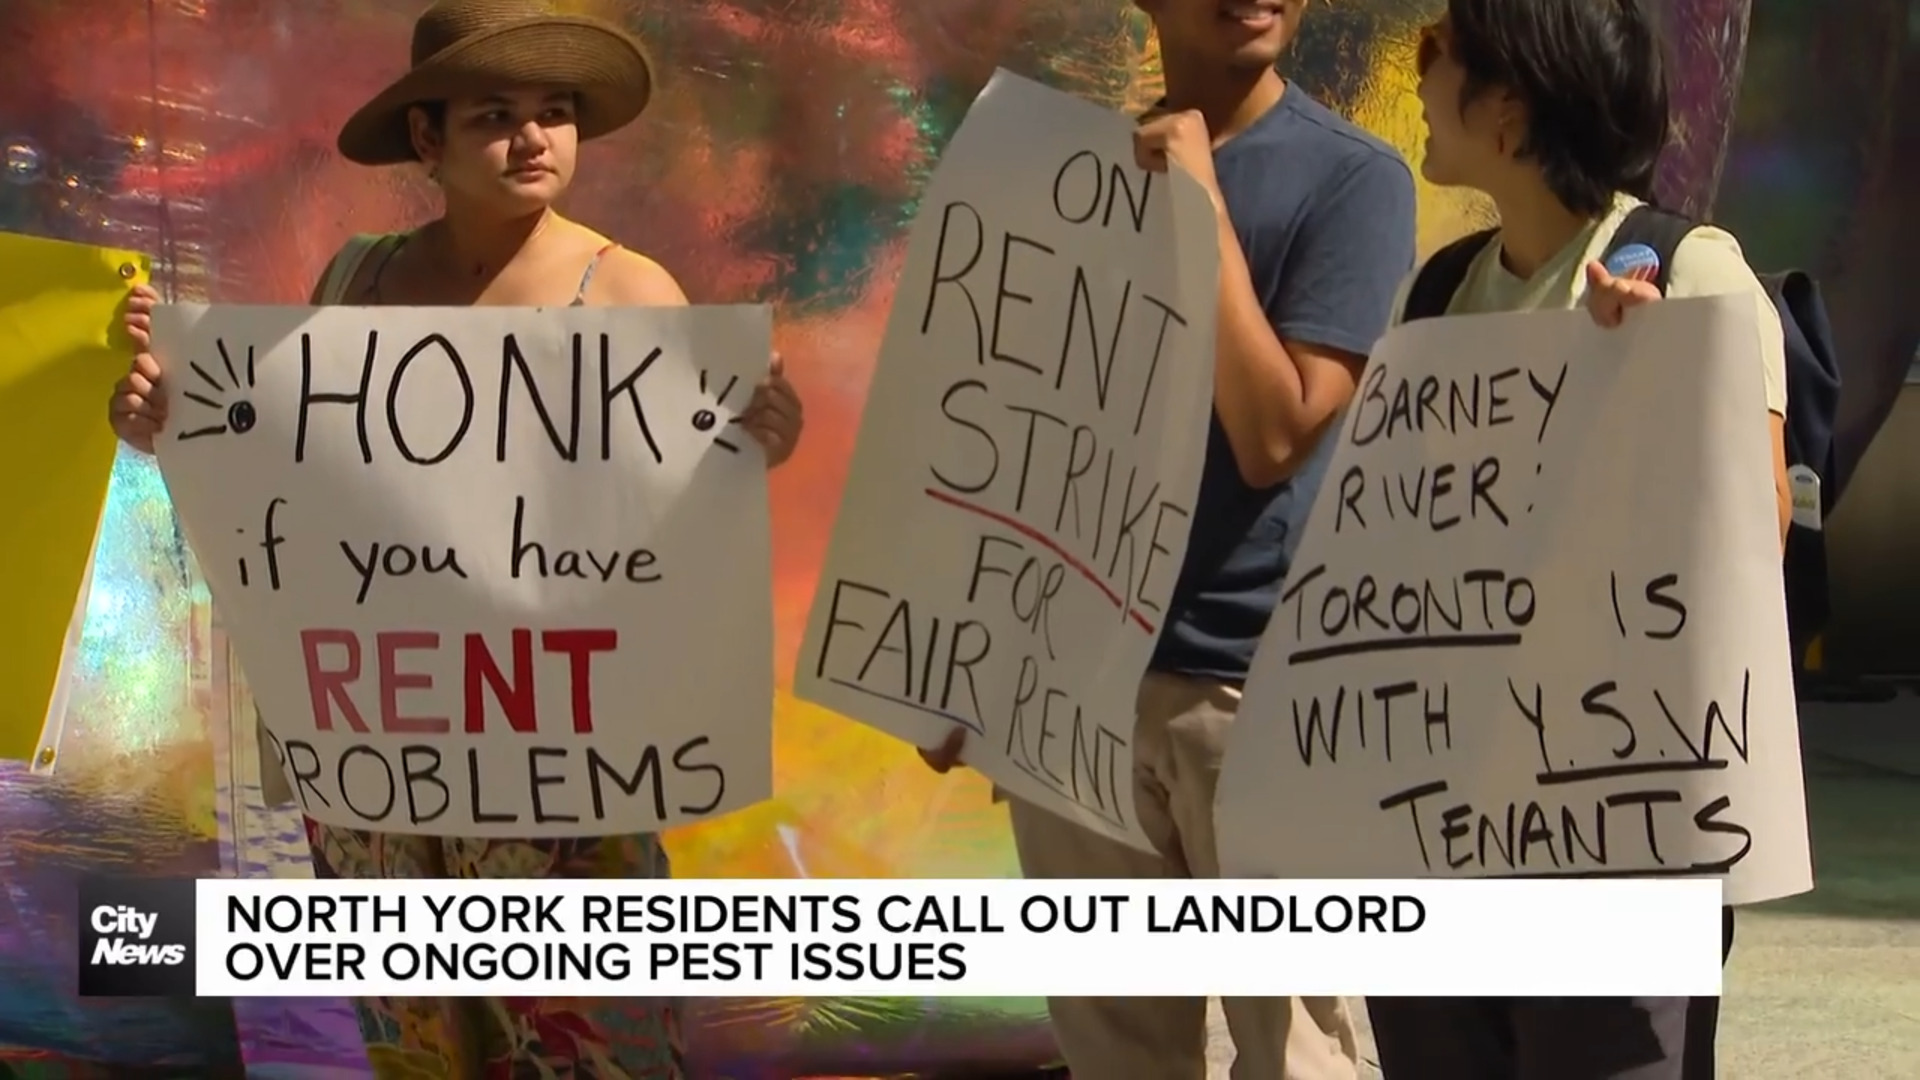 North York residents call out landlord over ongoing pest issues